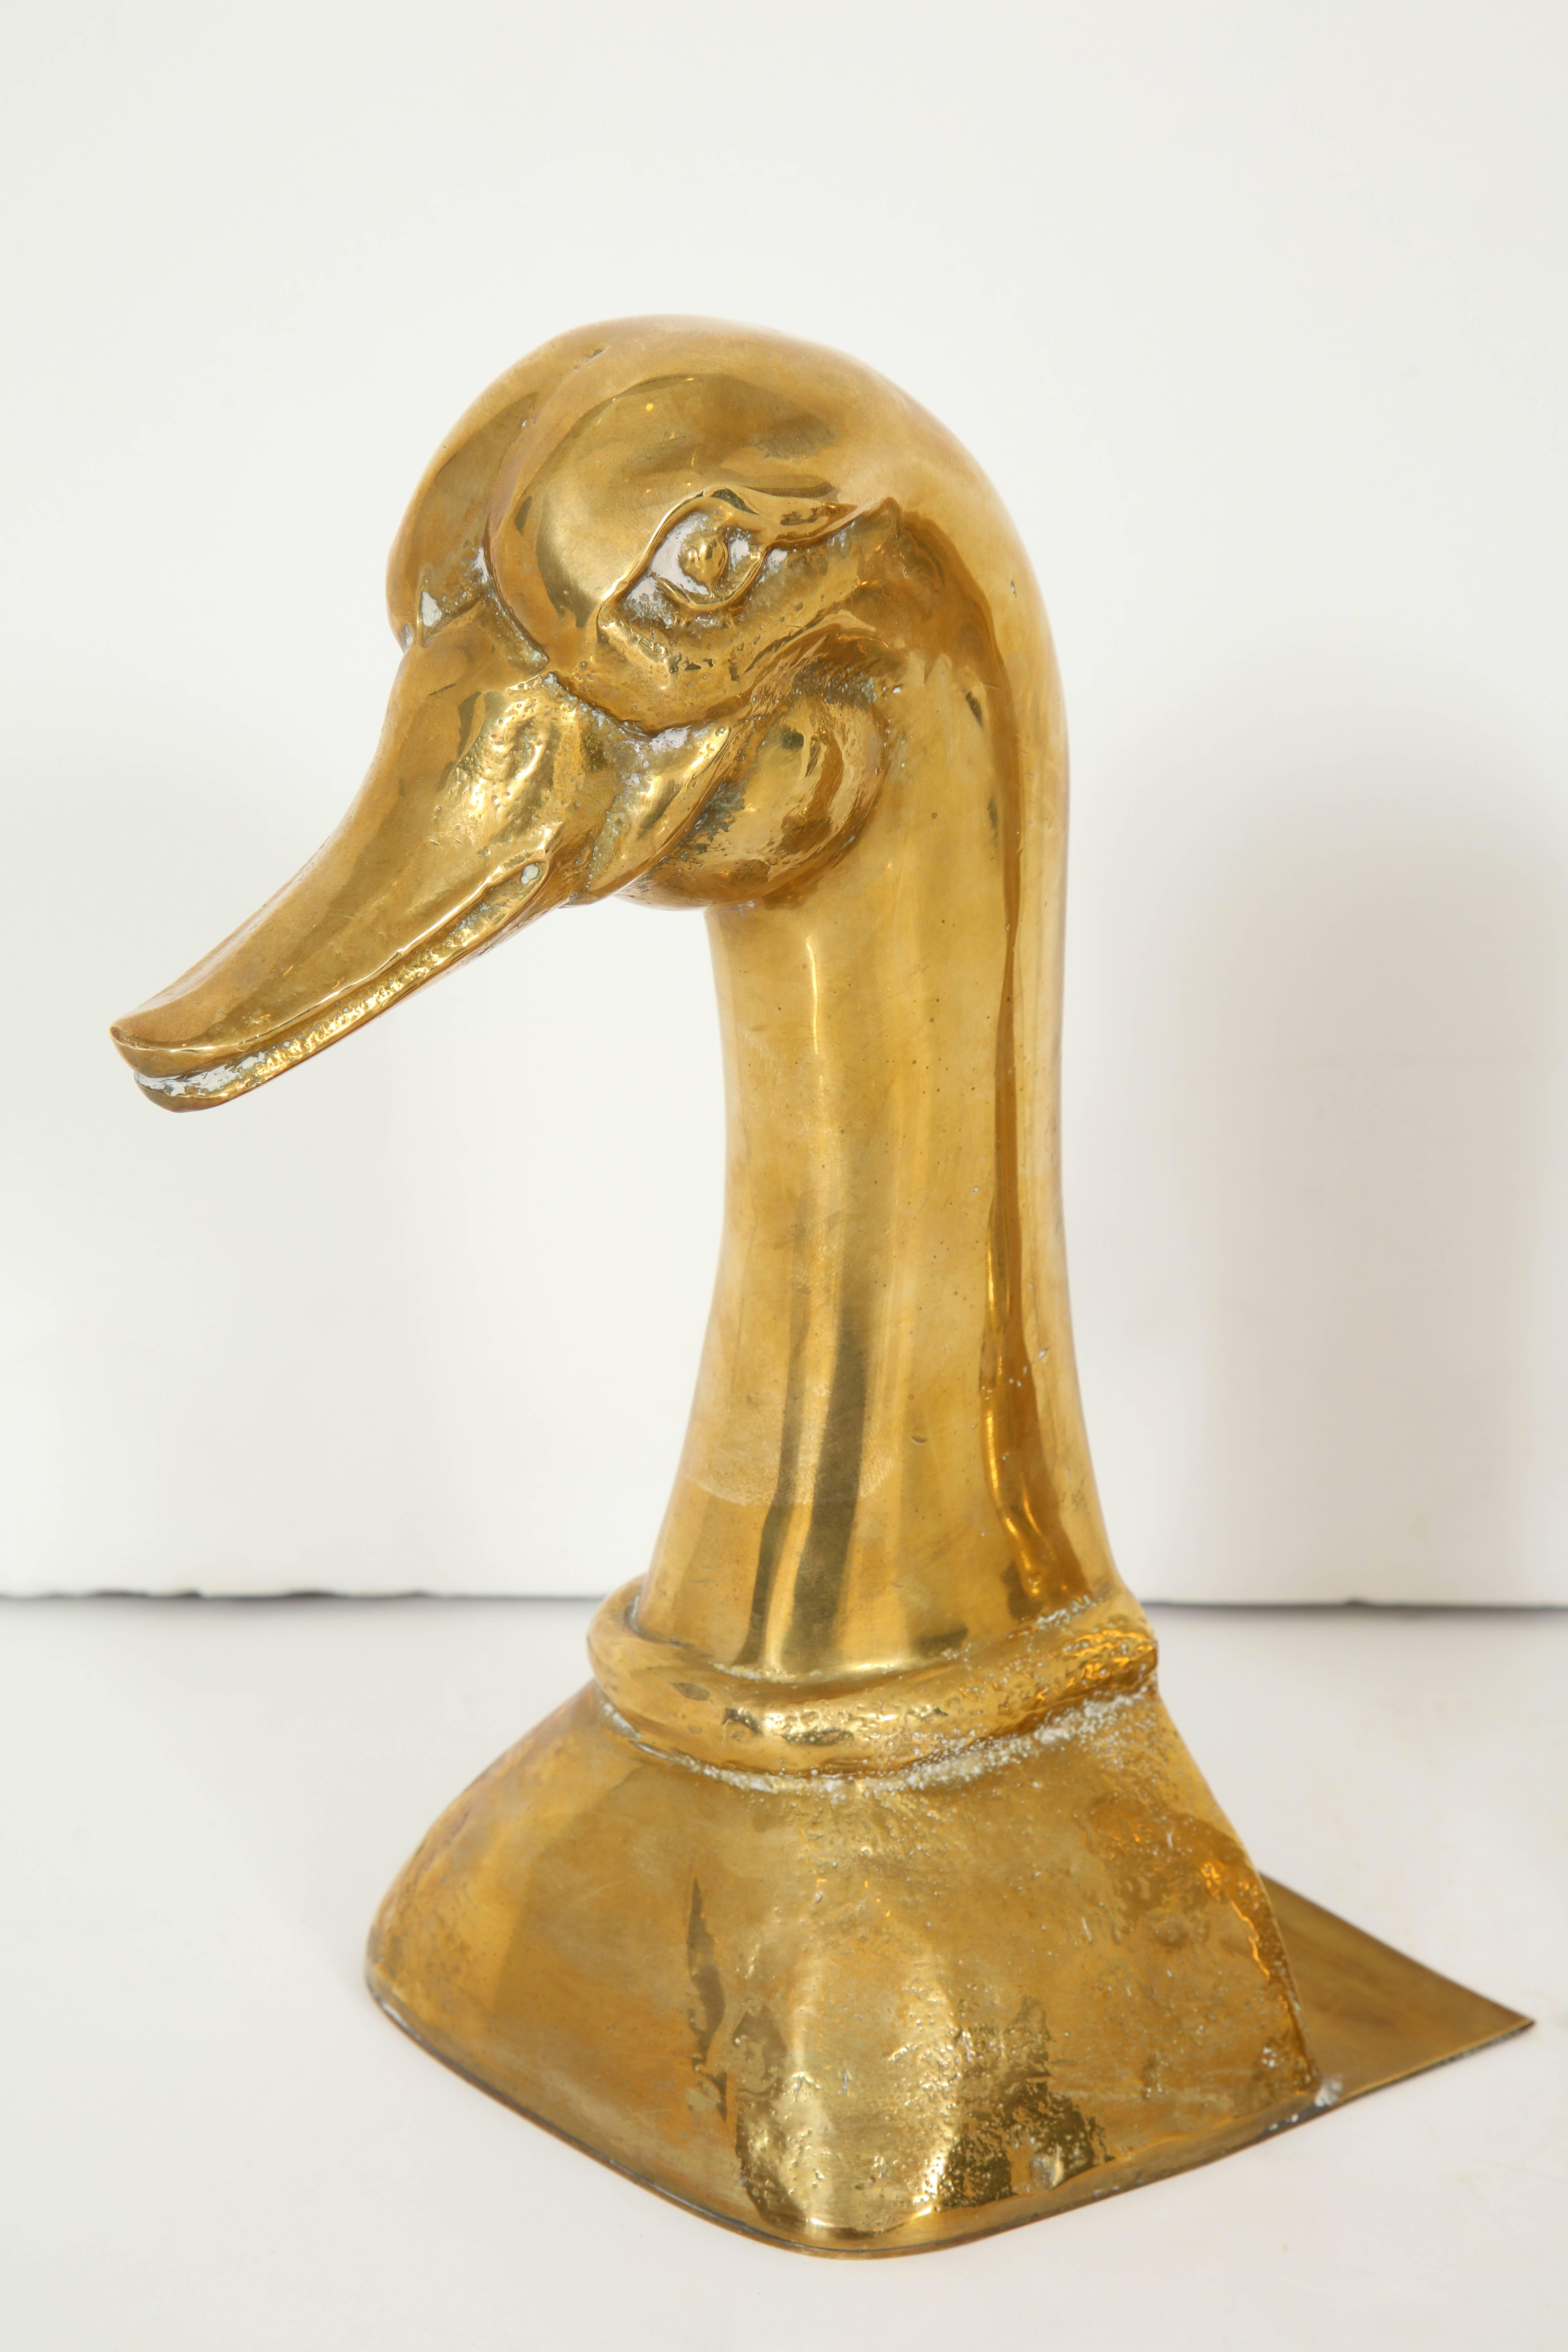 Spanish Pair of Polished Brass Duck Bookends by Sarried